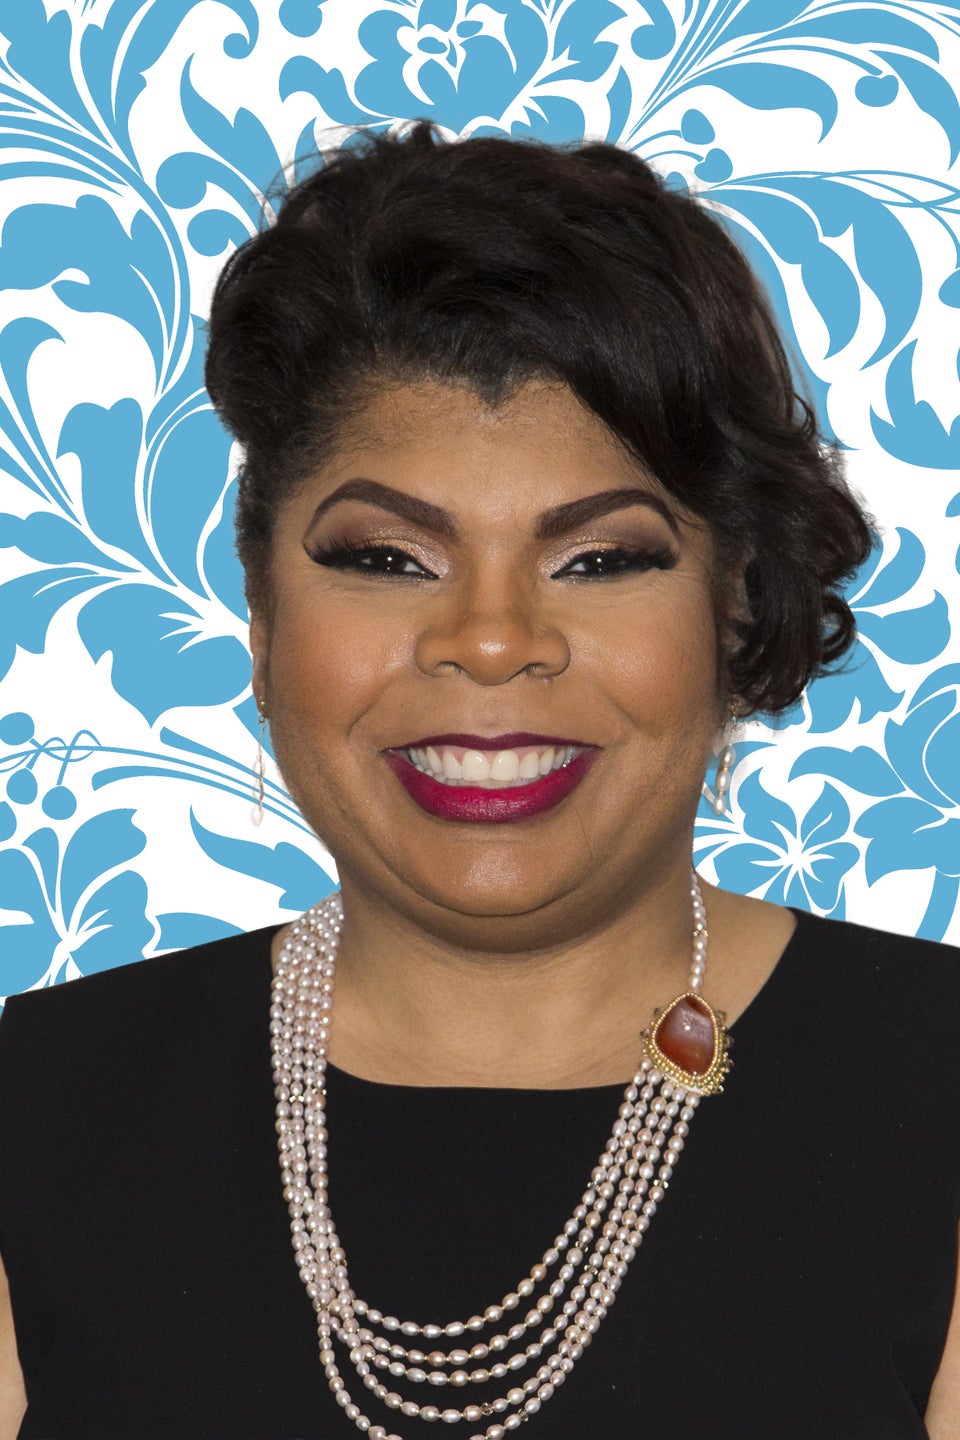 The Quick Read: April Ryan Received Death Threats After Asking If Trump Considered Resigning